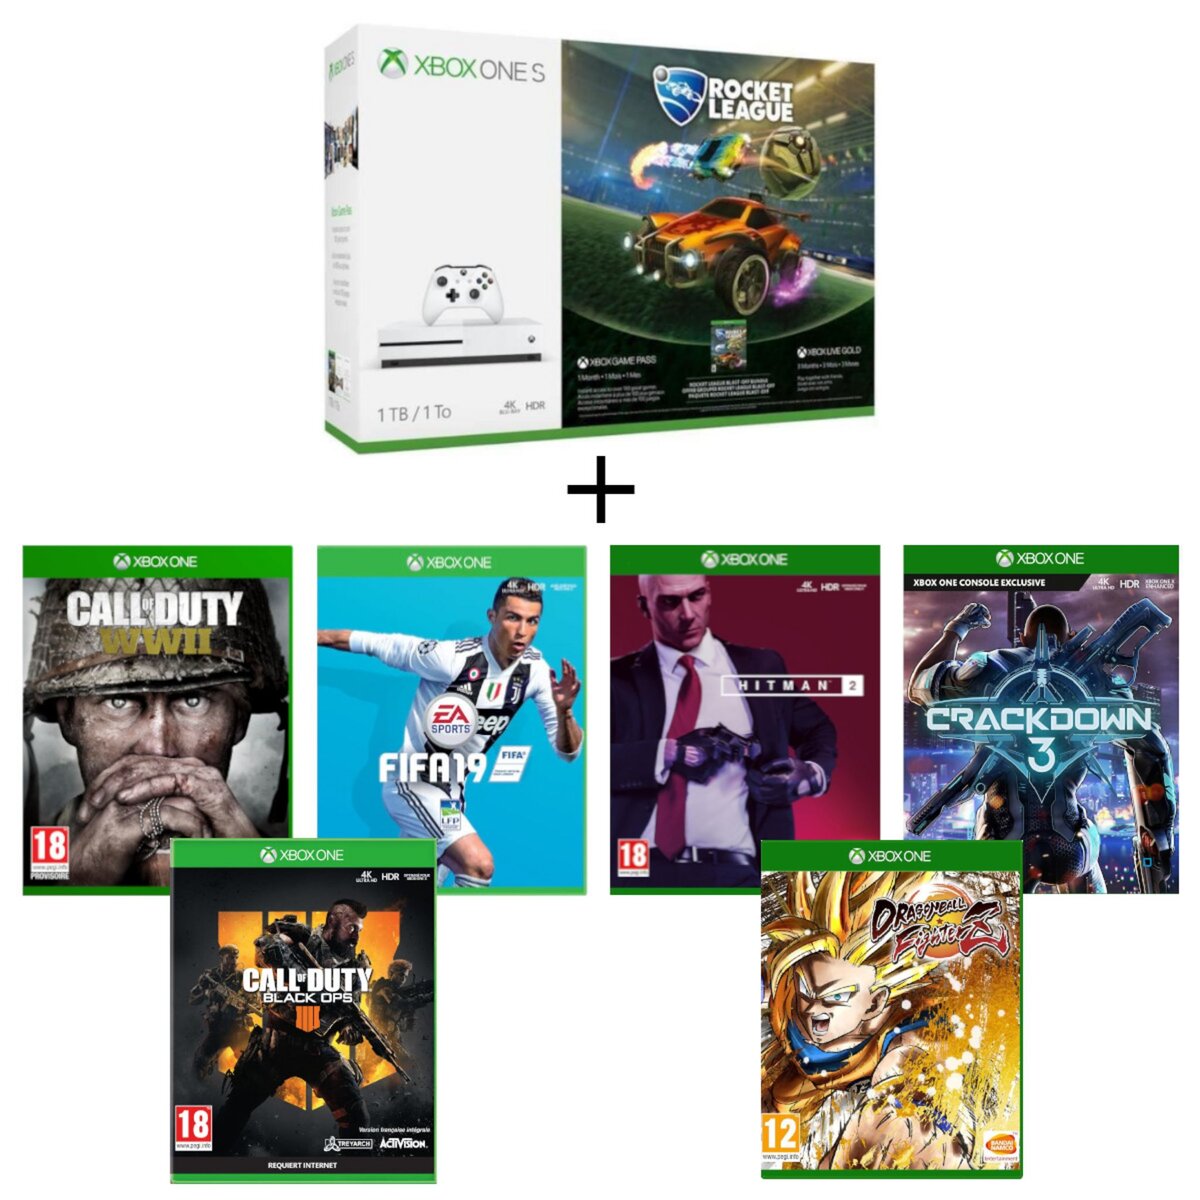 MICROSOFT Console Xbox One S 1To Rocket League + Dragon Ball FighterZ + Call of Duty WWII + Fifa 19 + Crackdown 3 + Call of Duty Black Ops 4 + Hitman 2